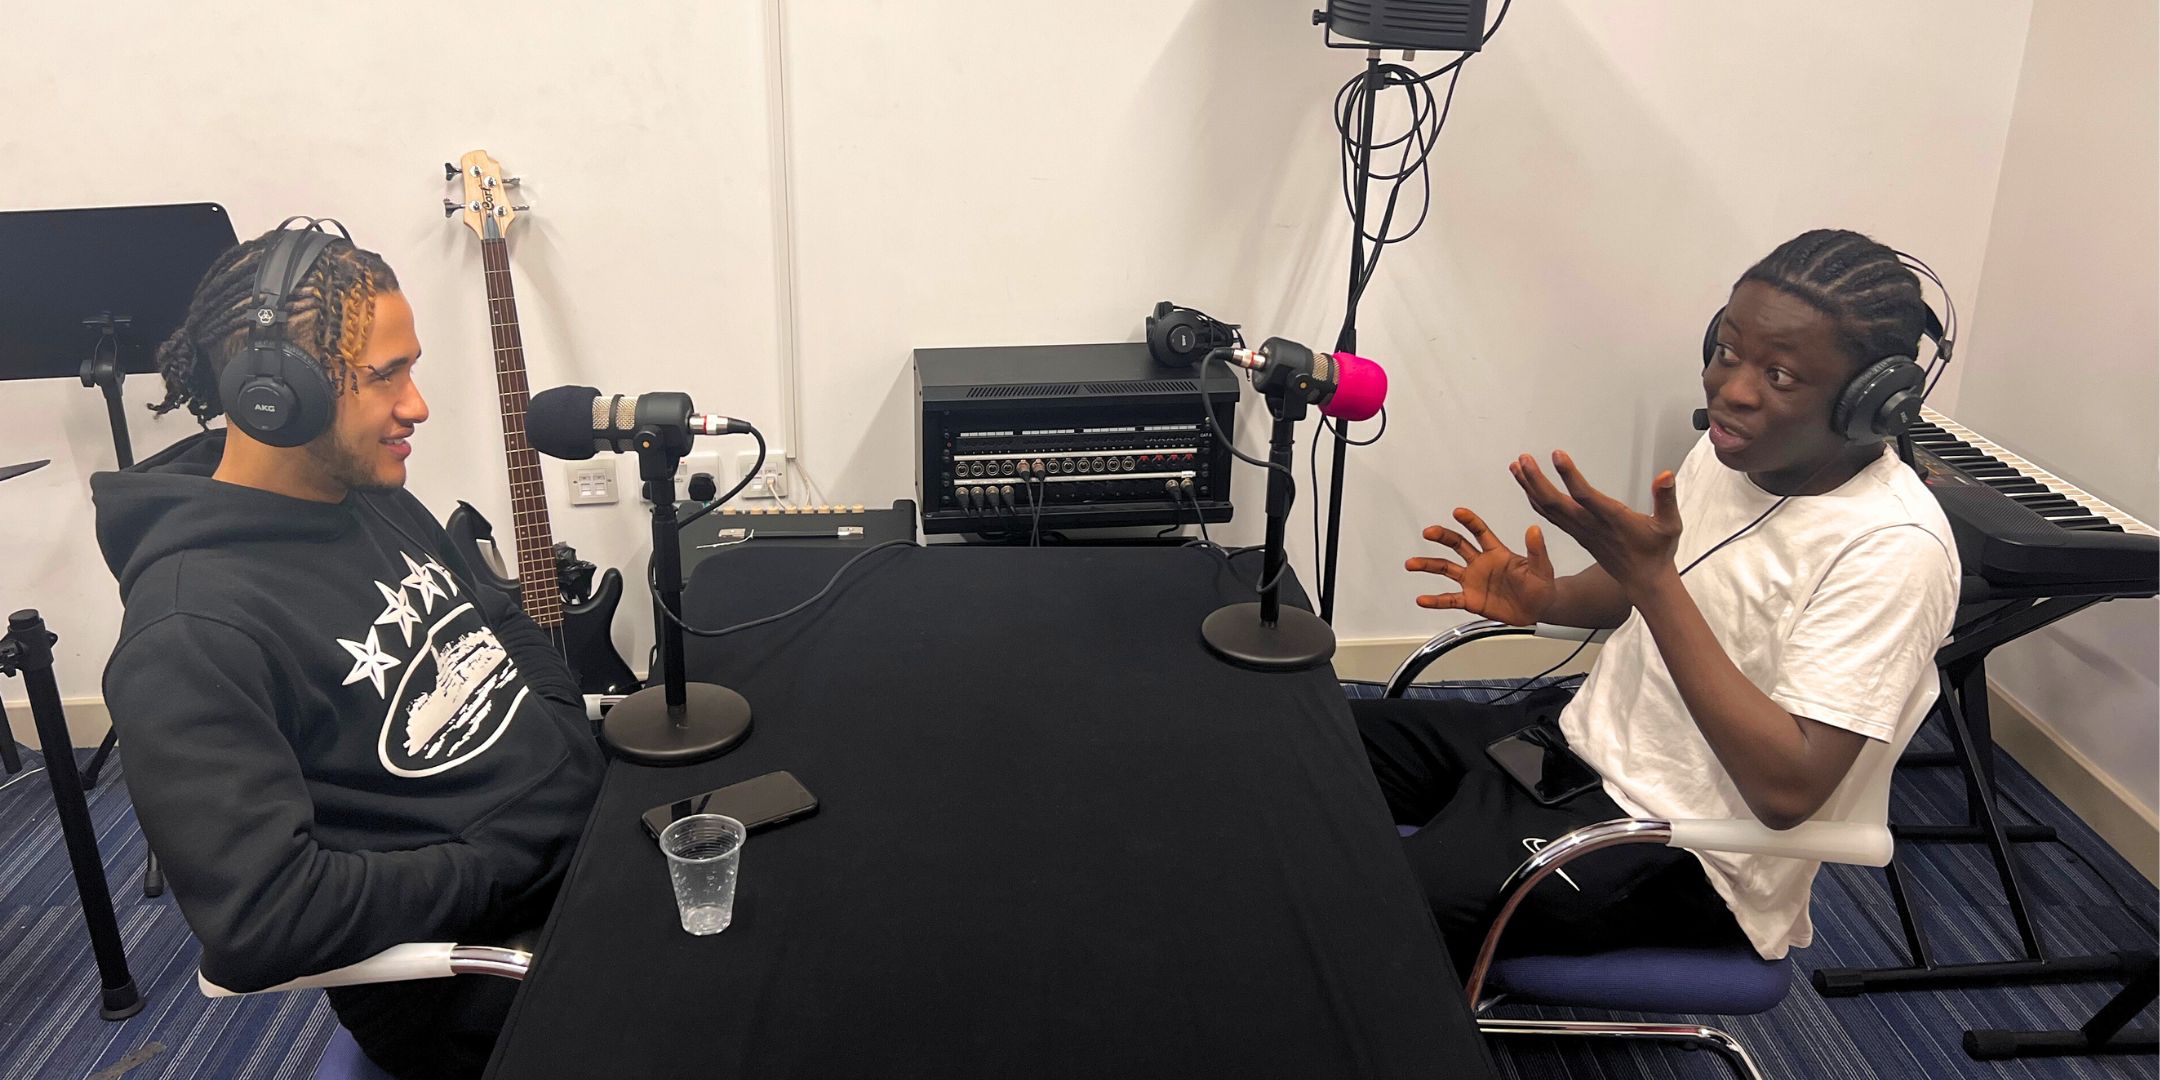 One of our young people is speaking enthusiastically to Newham-raised grime artist Swanandonly during their recording session for the Newham Dictionary of Culture podcast 